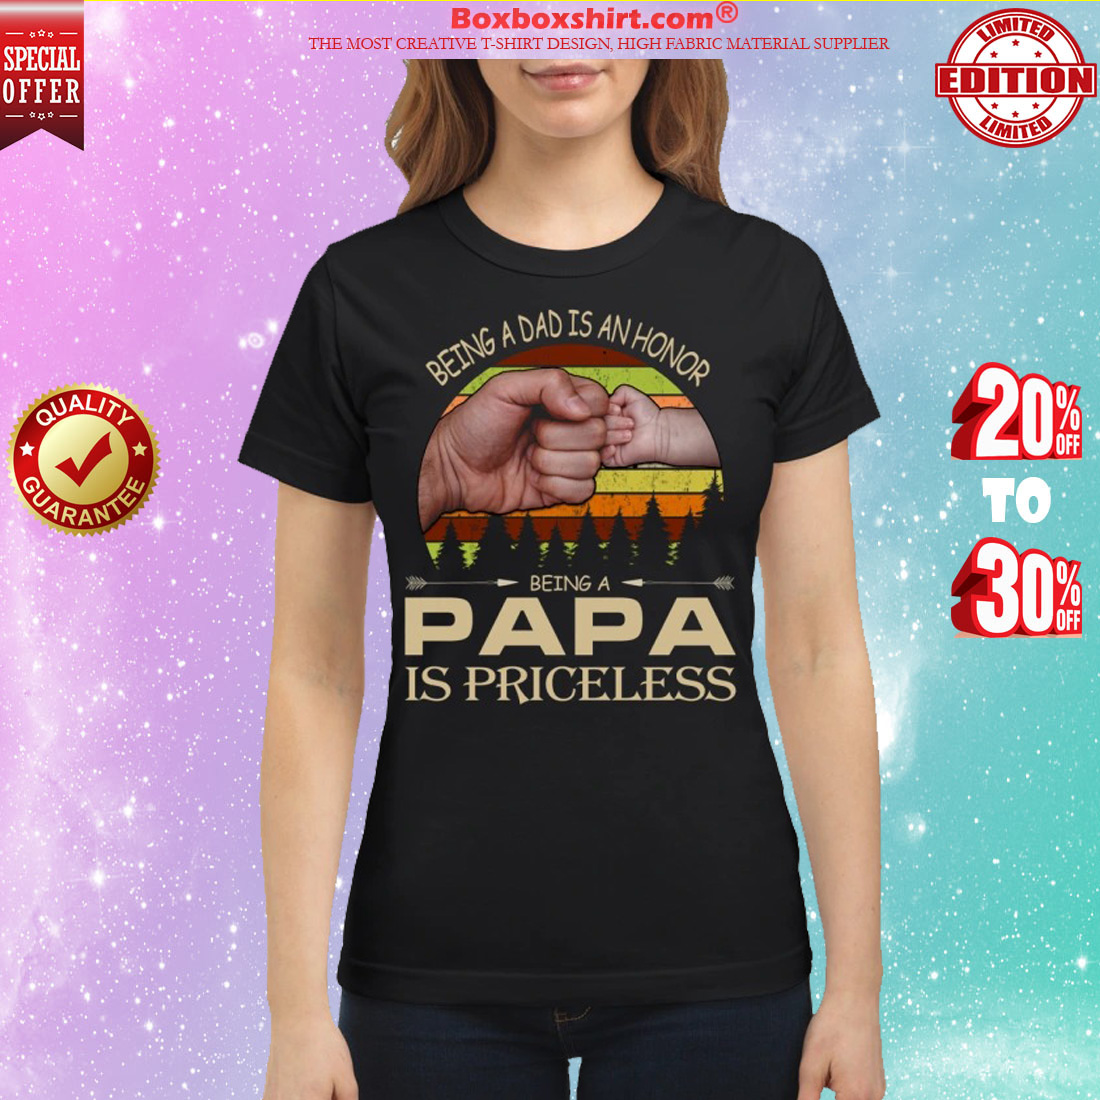 Being a dad is an honor being a papa is priceless classic shirt